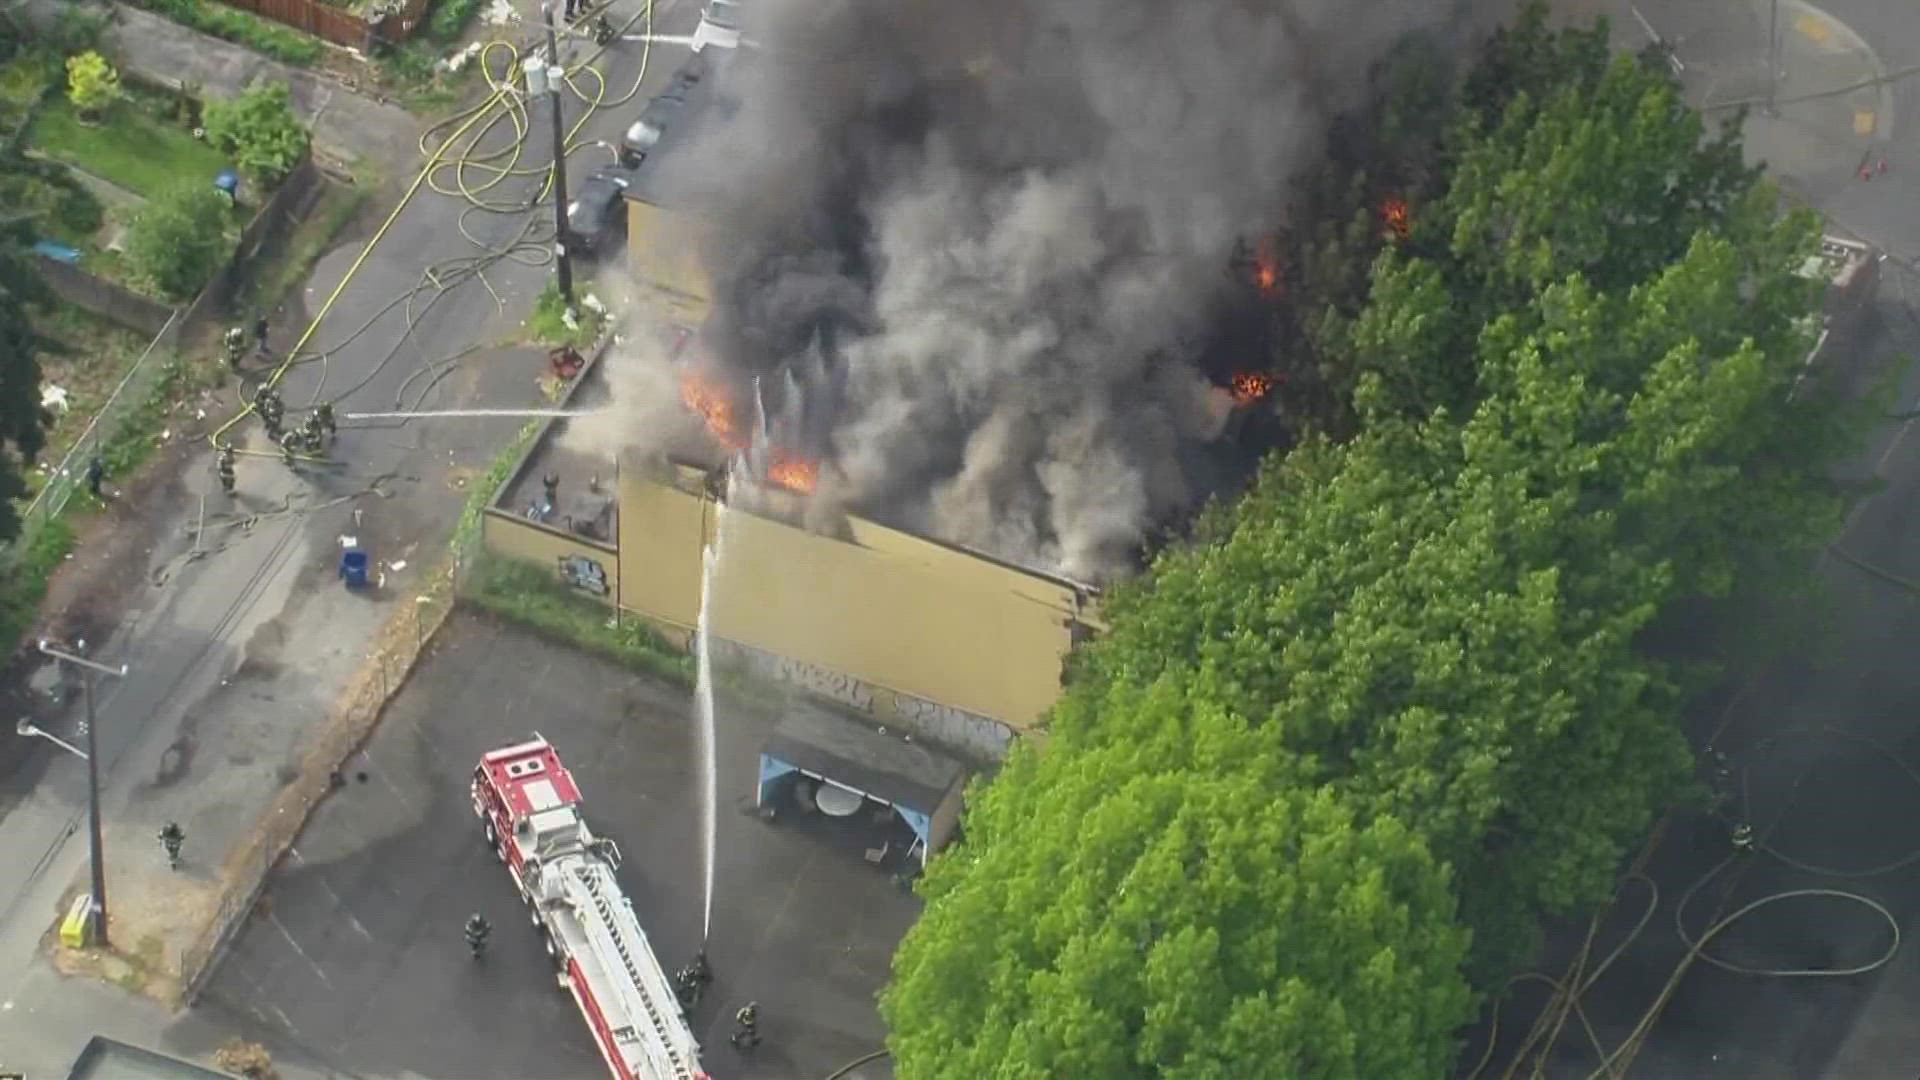 Building formerly housing beloved Borracchini's Bakery goes up in flames Friday, May 27.